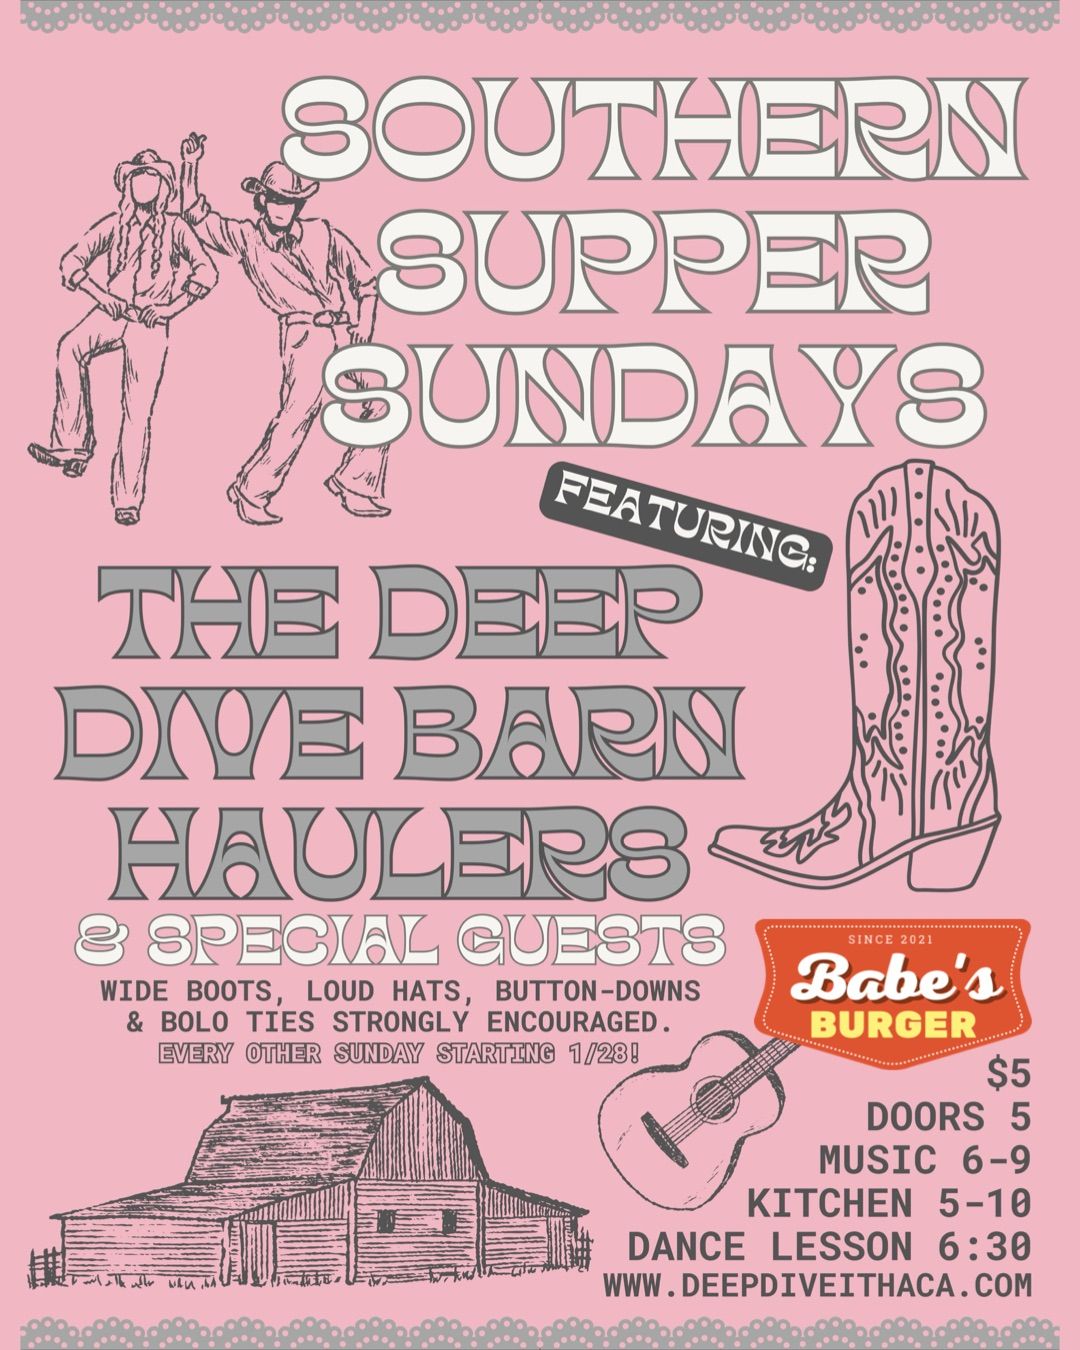 Southern Supper Sunday w\/ The Deep Dive Barn Hauler's & Babe's Burgers!